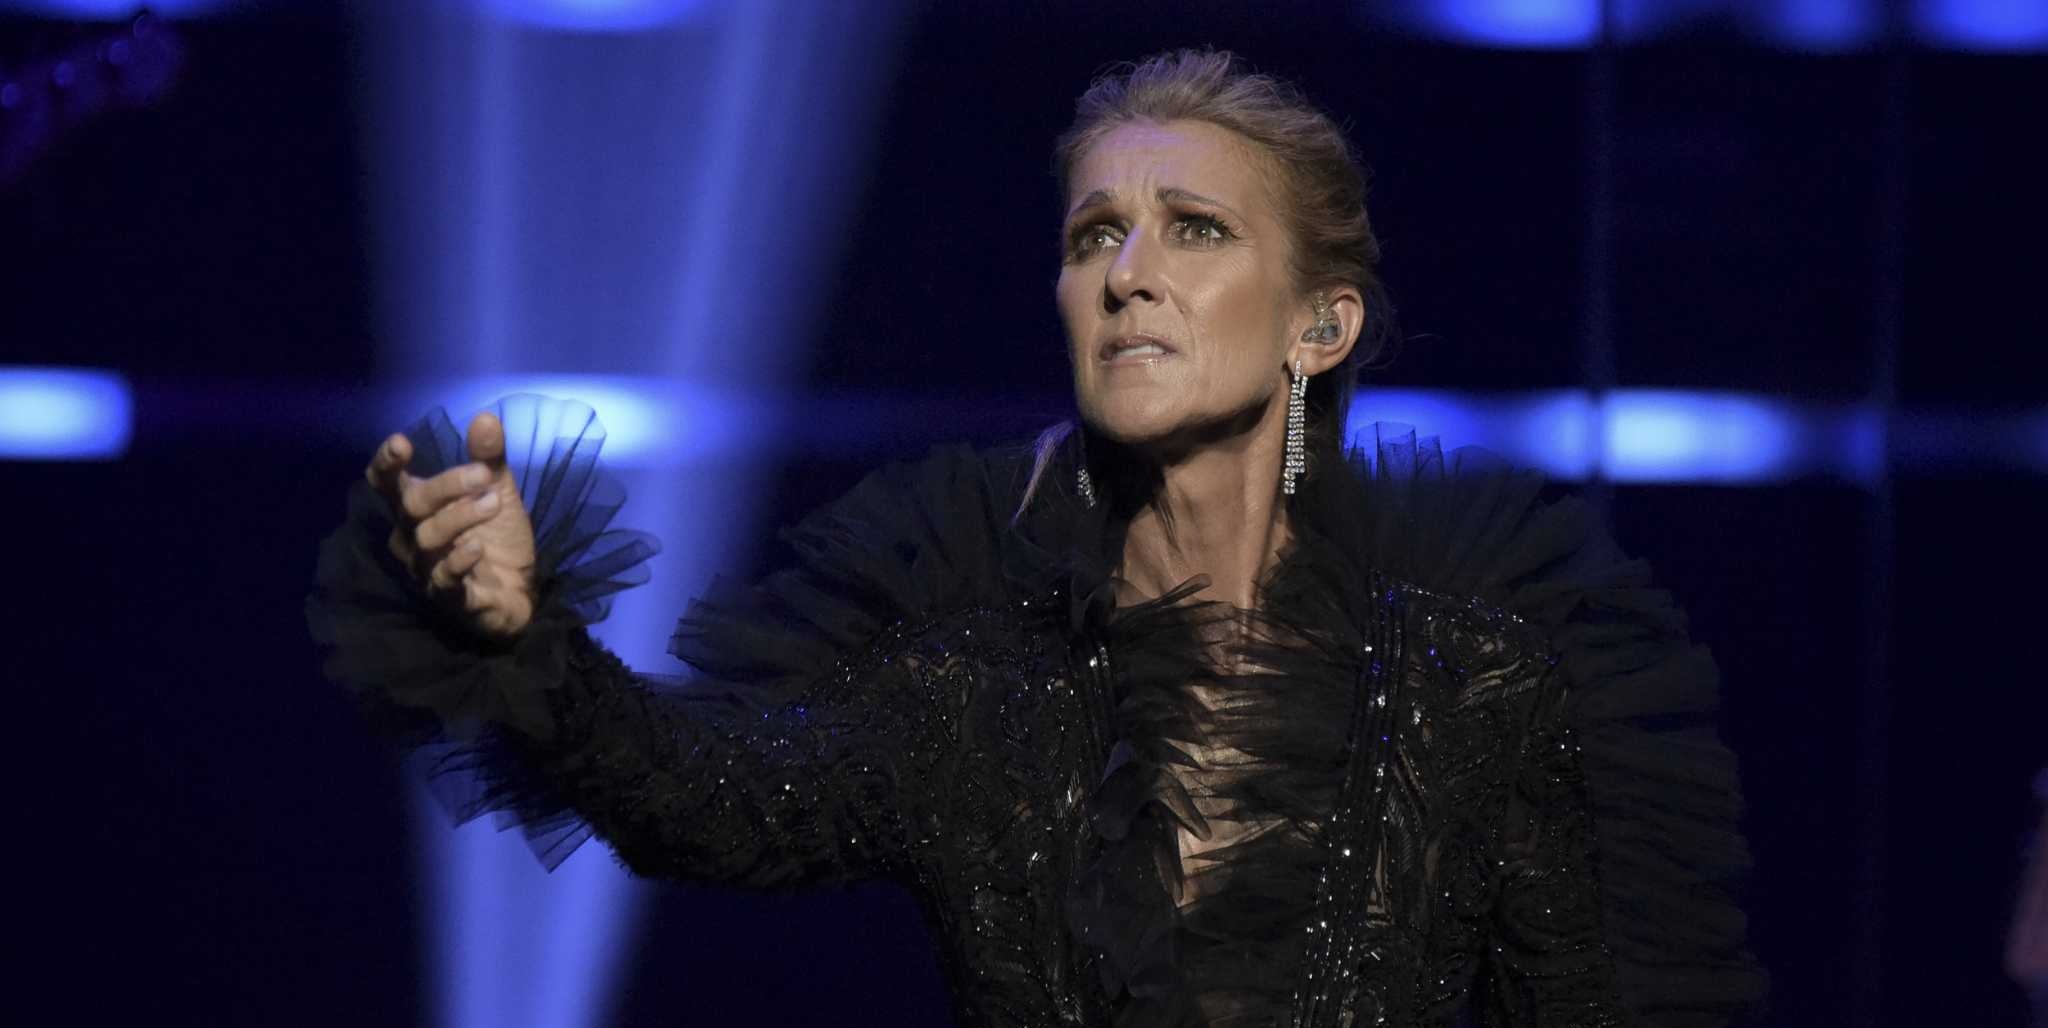 Watch: Celine Dion Delivers Stellar ‘My Heart Will Go On’ Performance At ‘Courage Tour’ Announcement Event